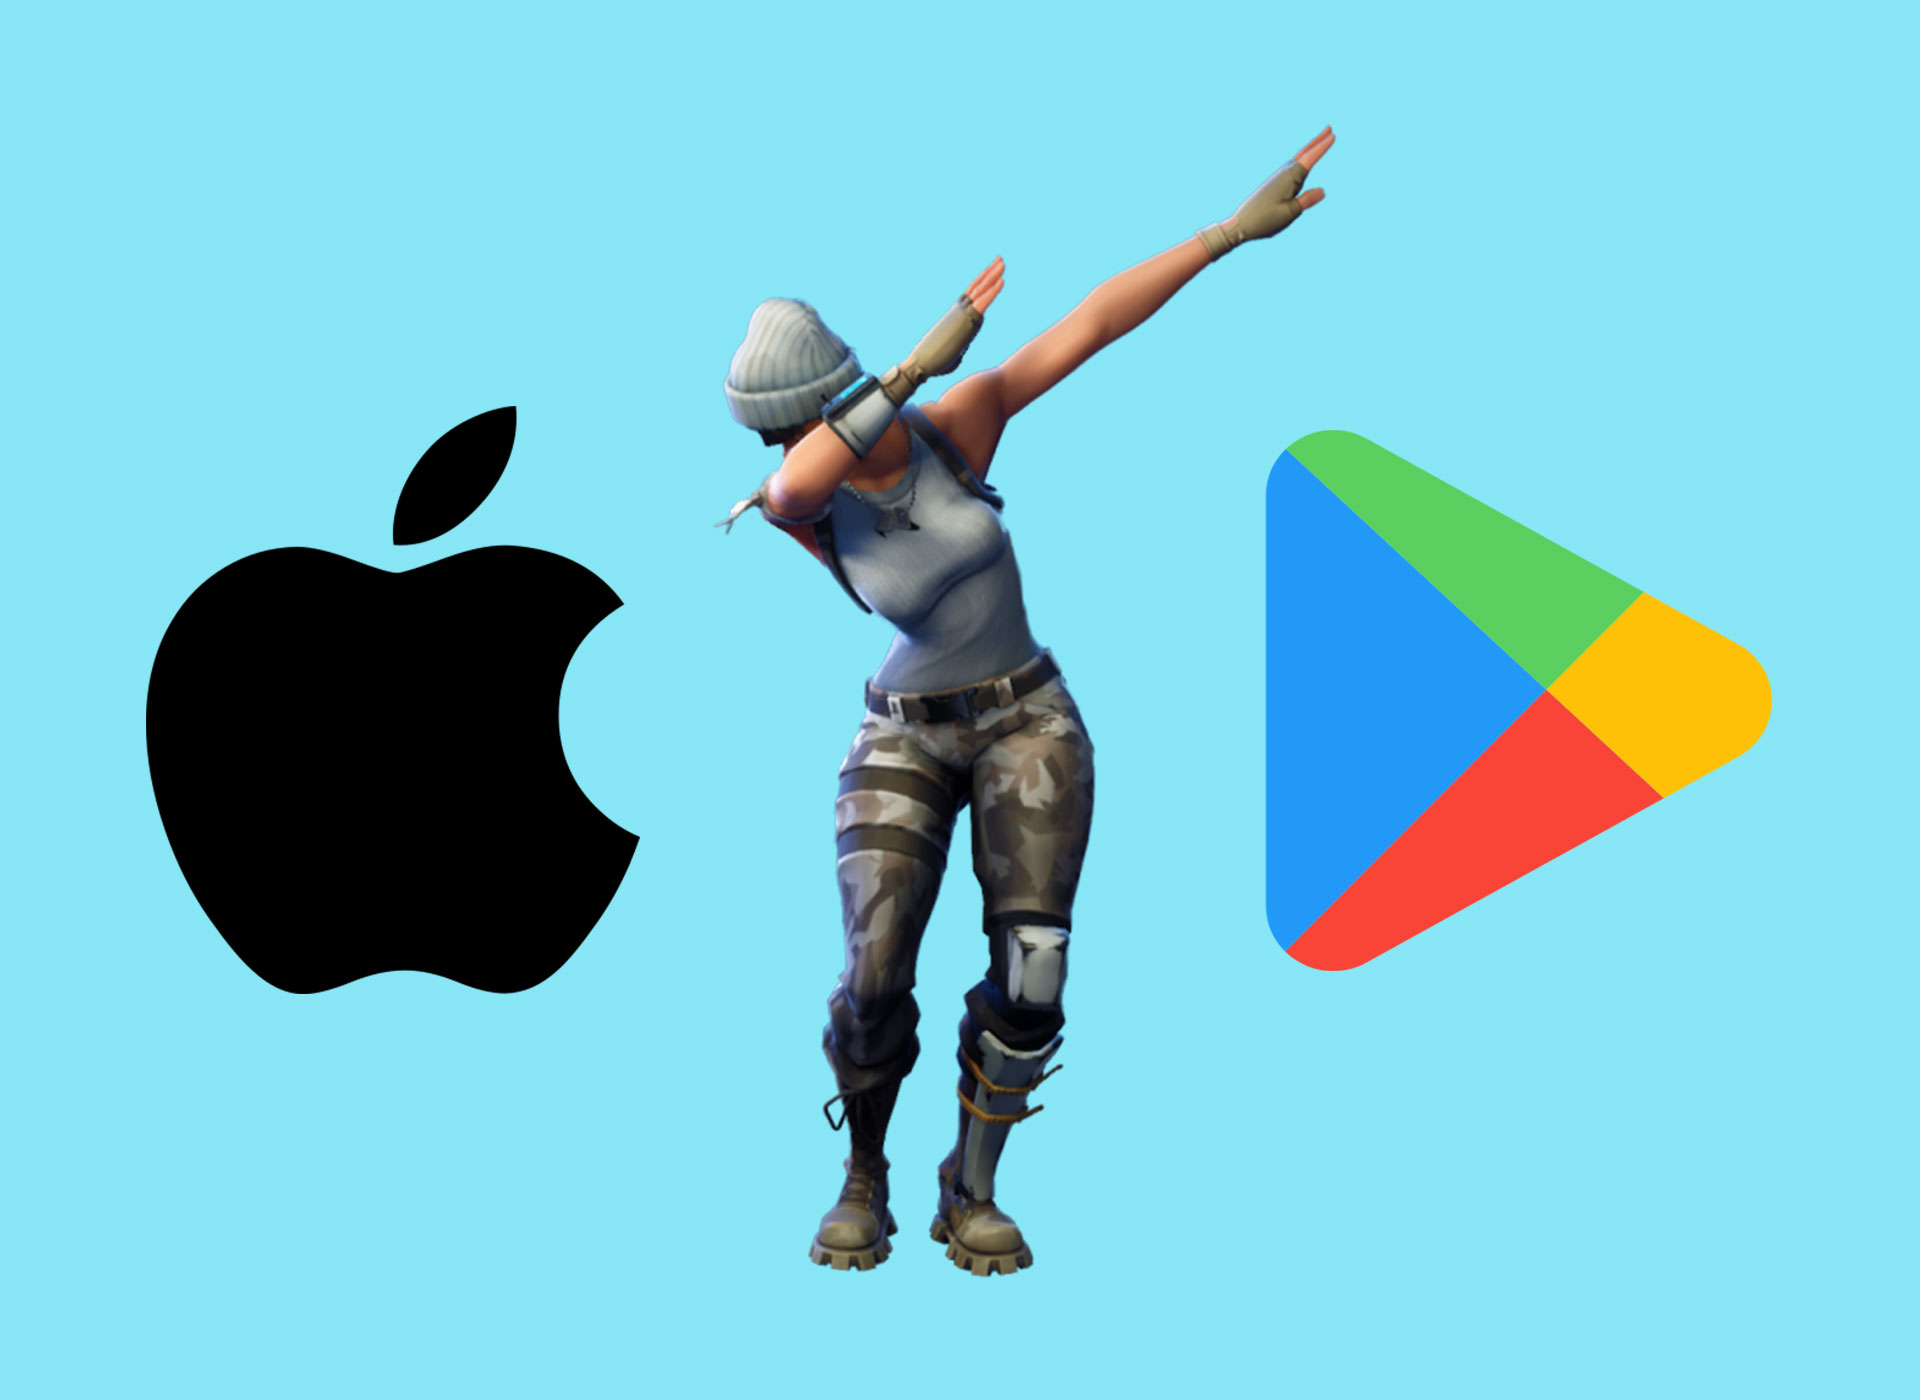 Both sides win and lose in judge's Epic Games vs. Apple ruling